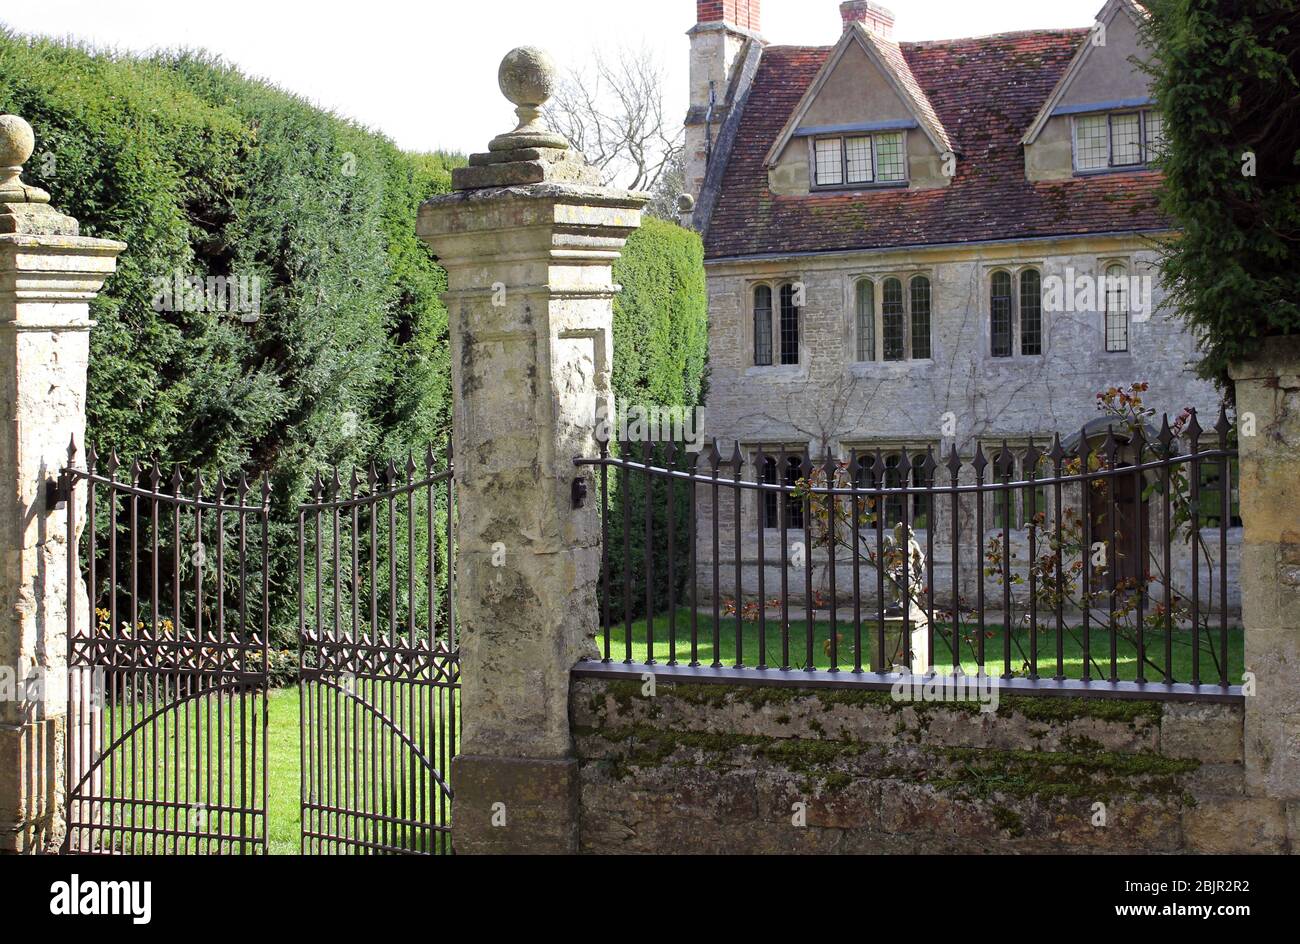 17th century Manor House in Garsington Oxford with a newly planted green courtyard springtime 2020 Stock Photo